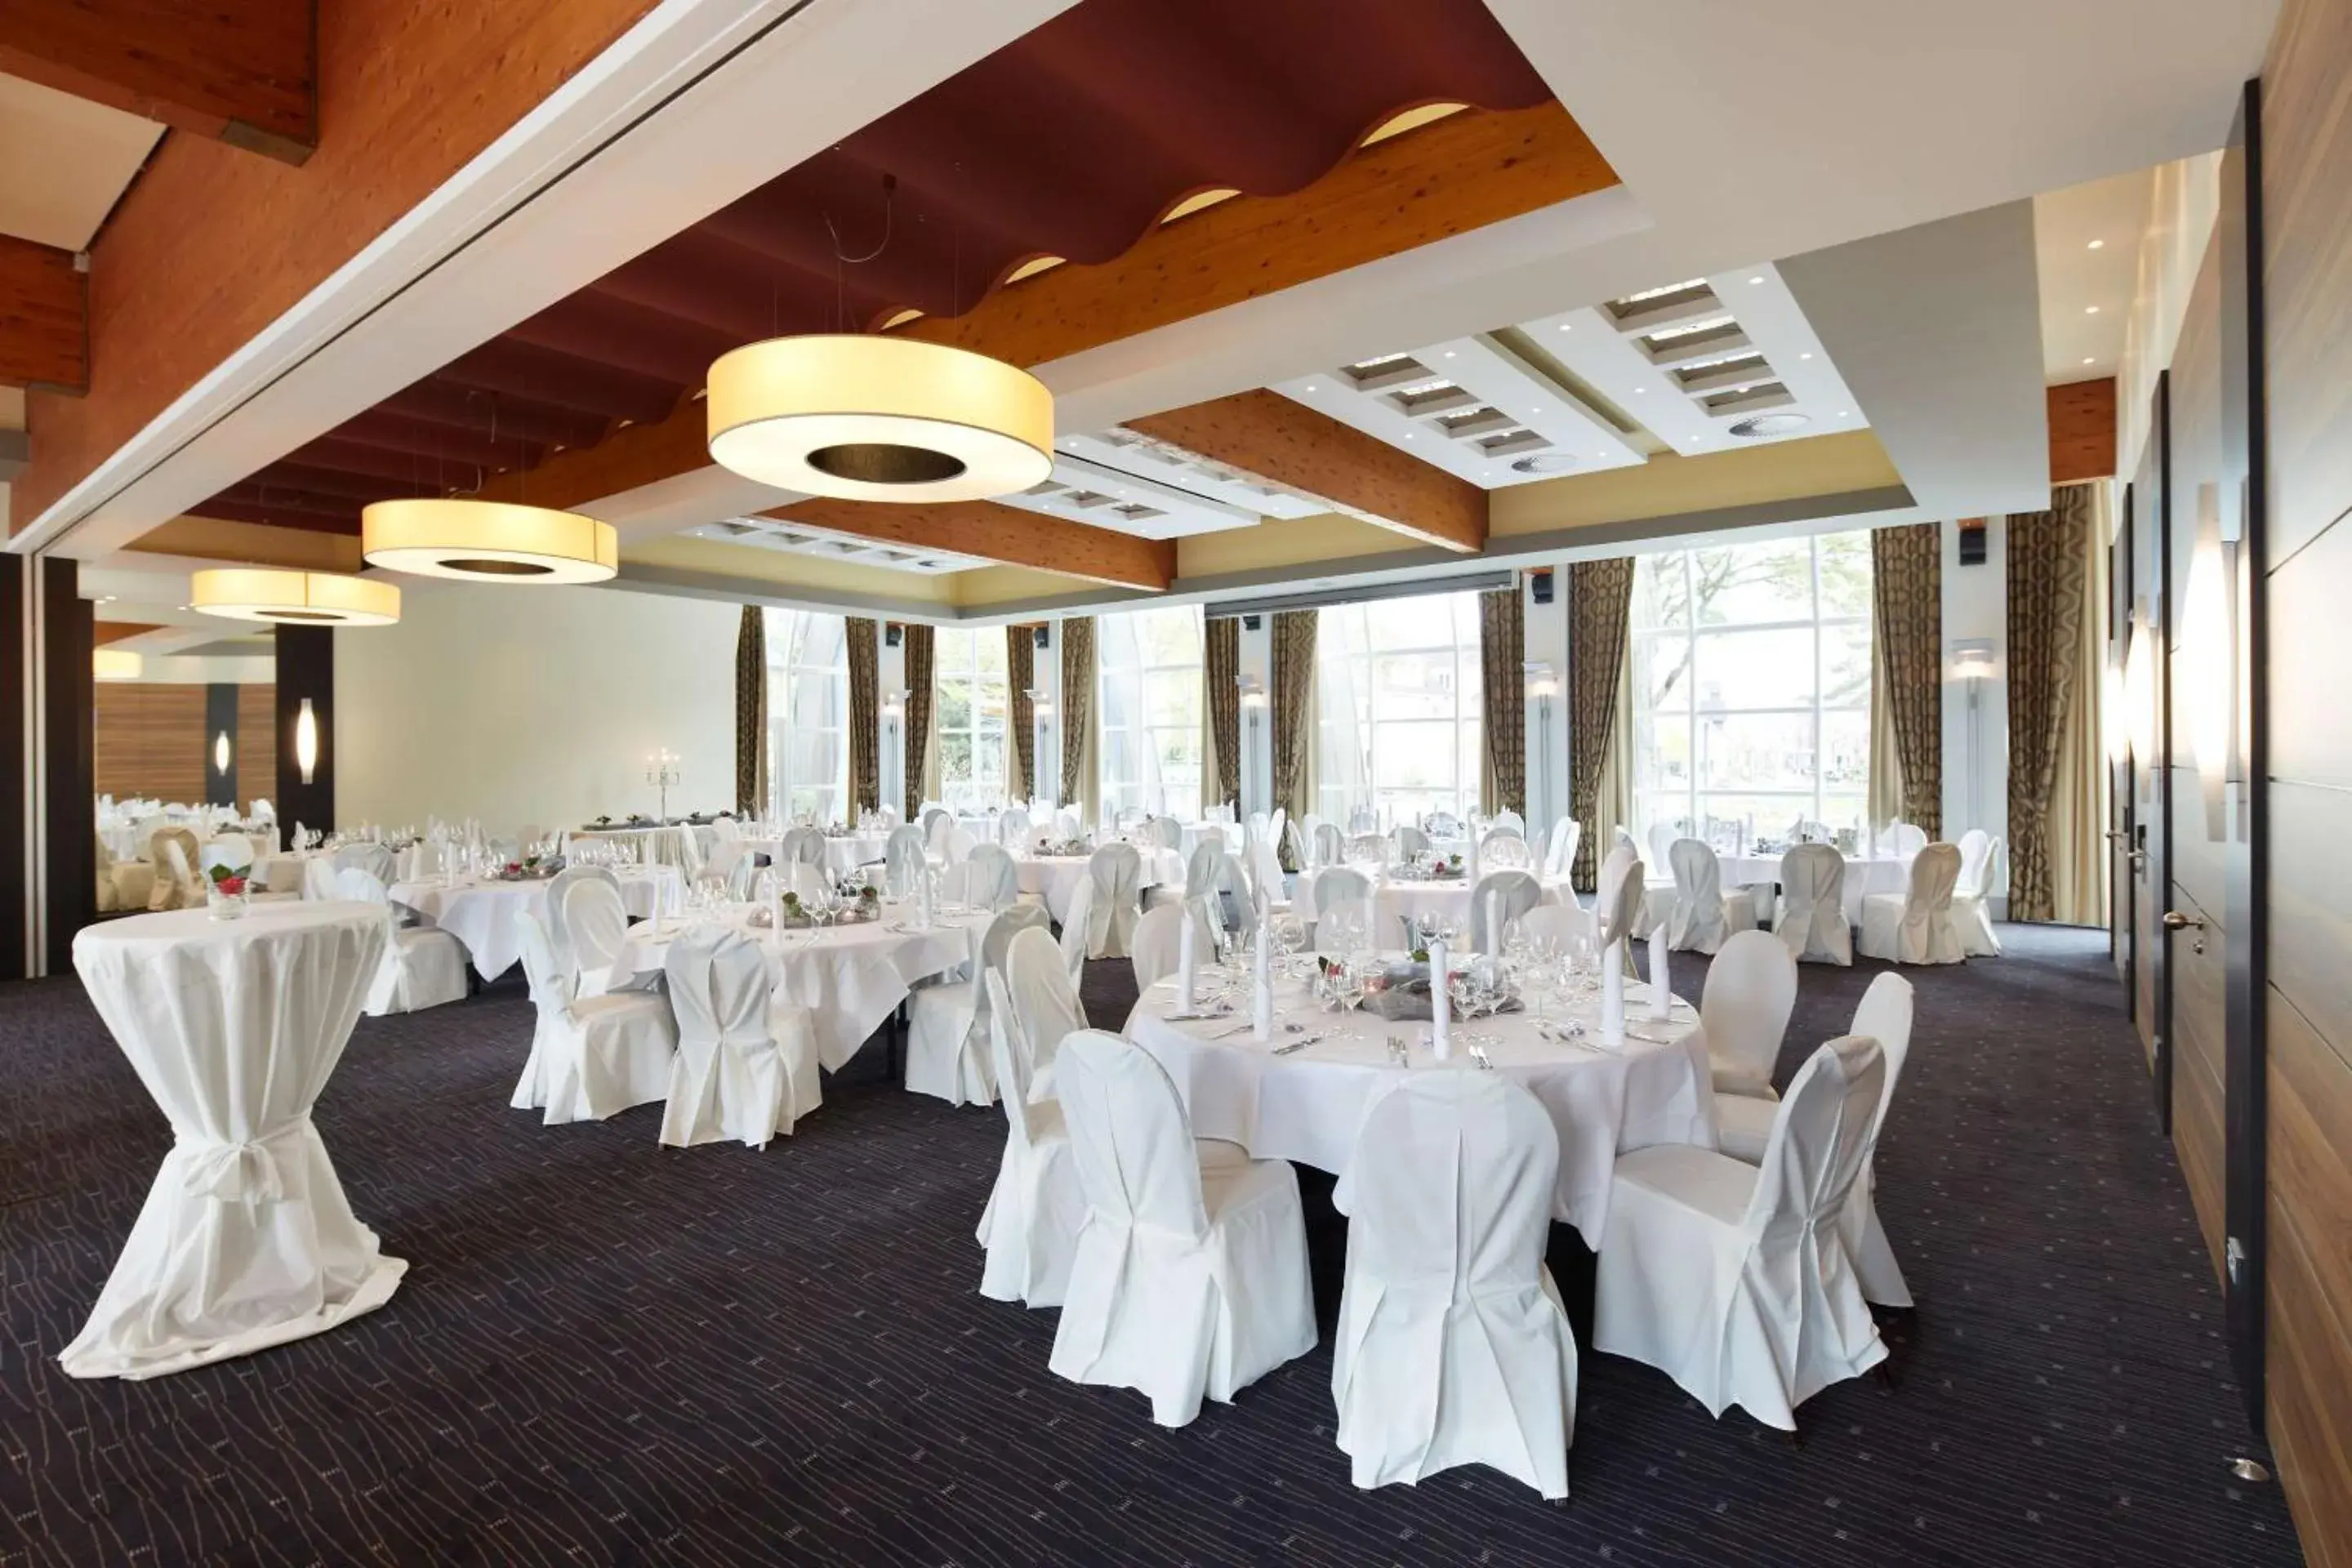 On site, Banquet Facilities in Best Western Premier Park Hotel & Spa